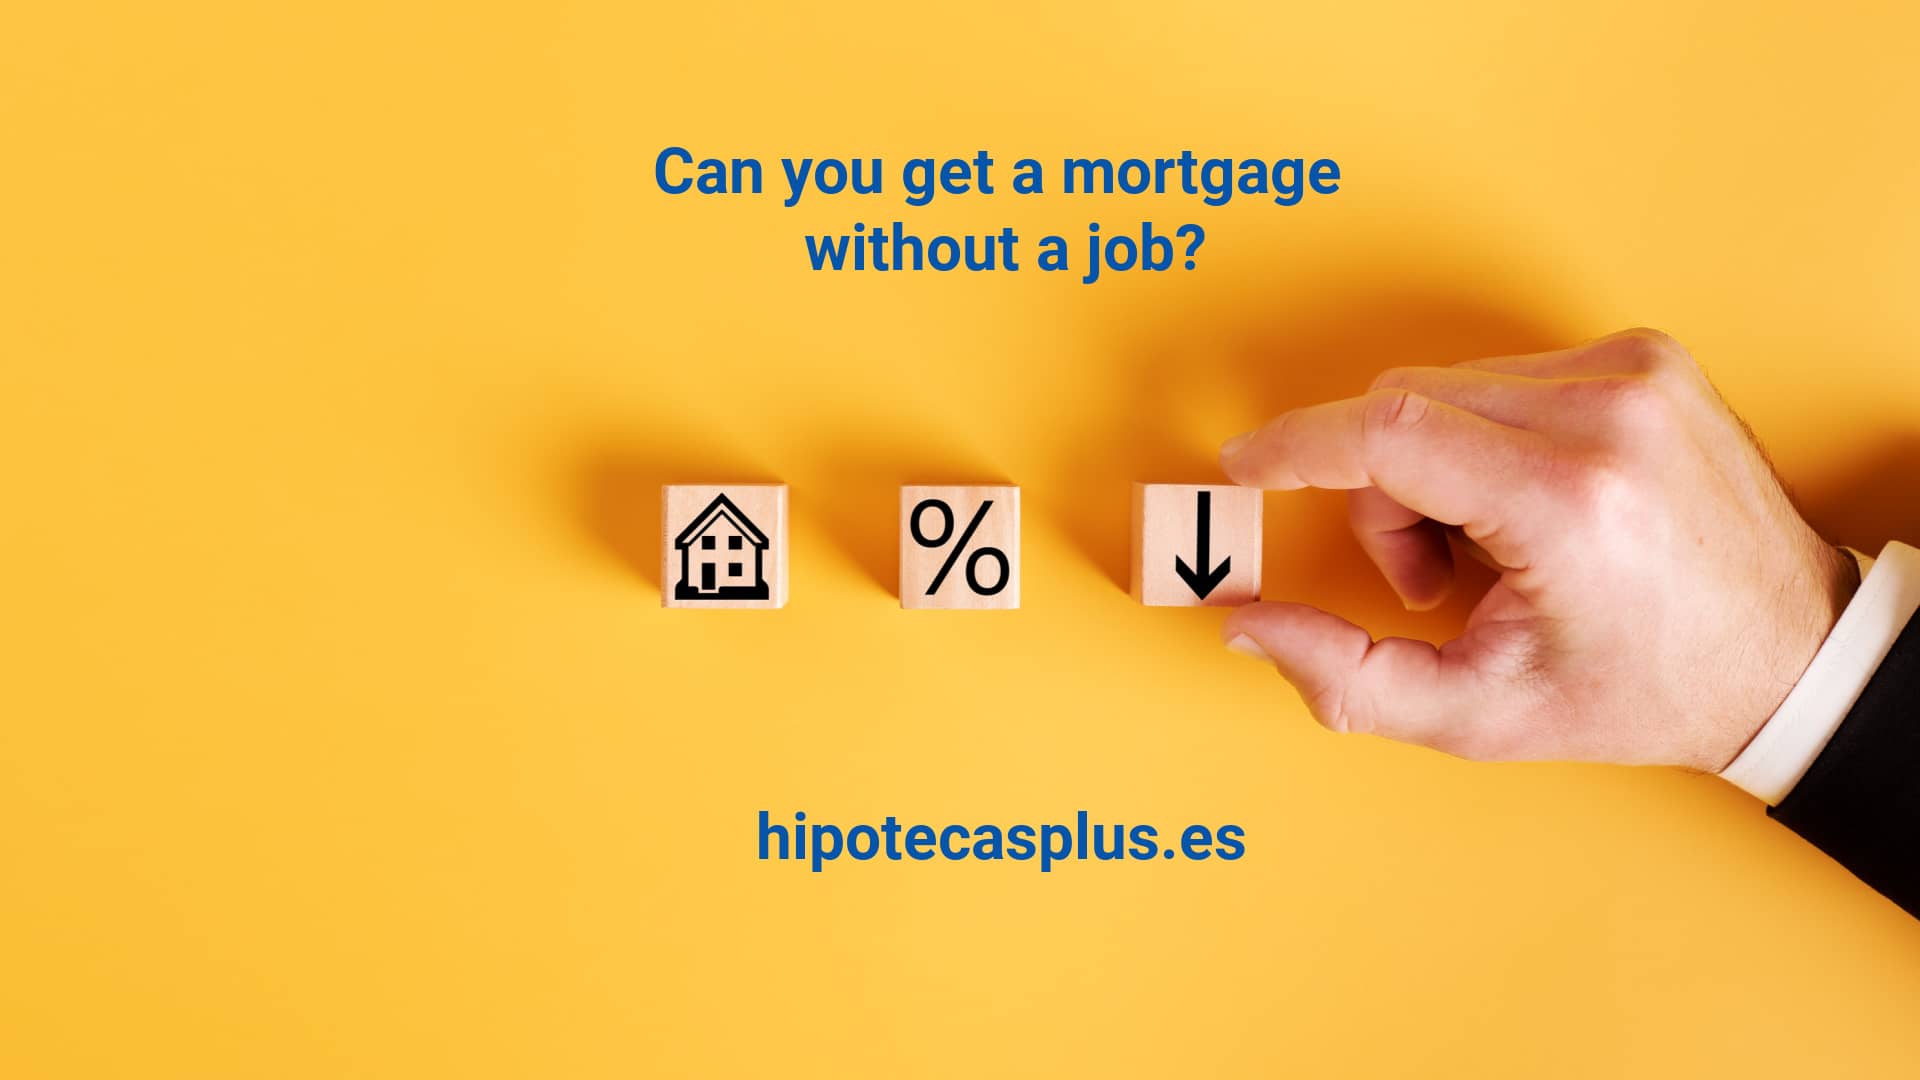 https://www.hipotecasplus.es/wp-content/uploads/HipotecasPlus-Can-You-Get-a-Mortgage-Without-a-Job-.jpg